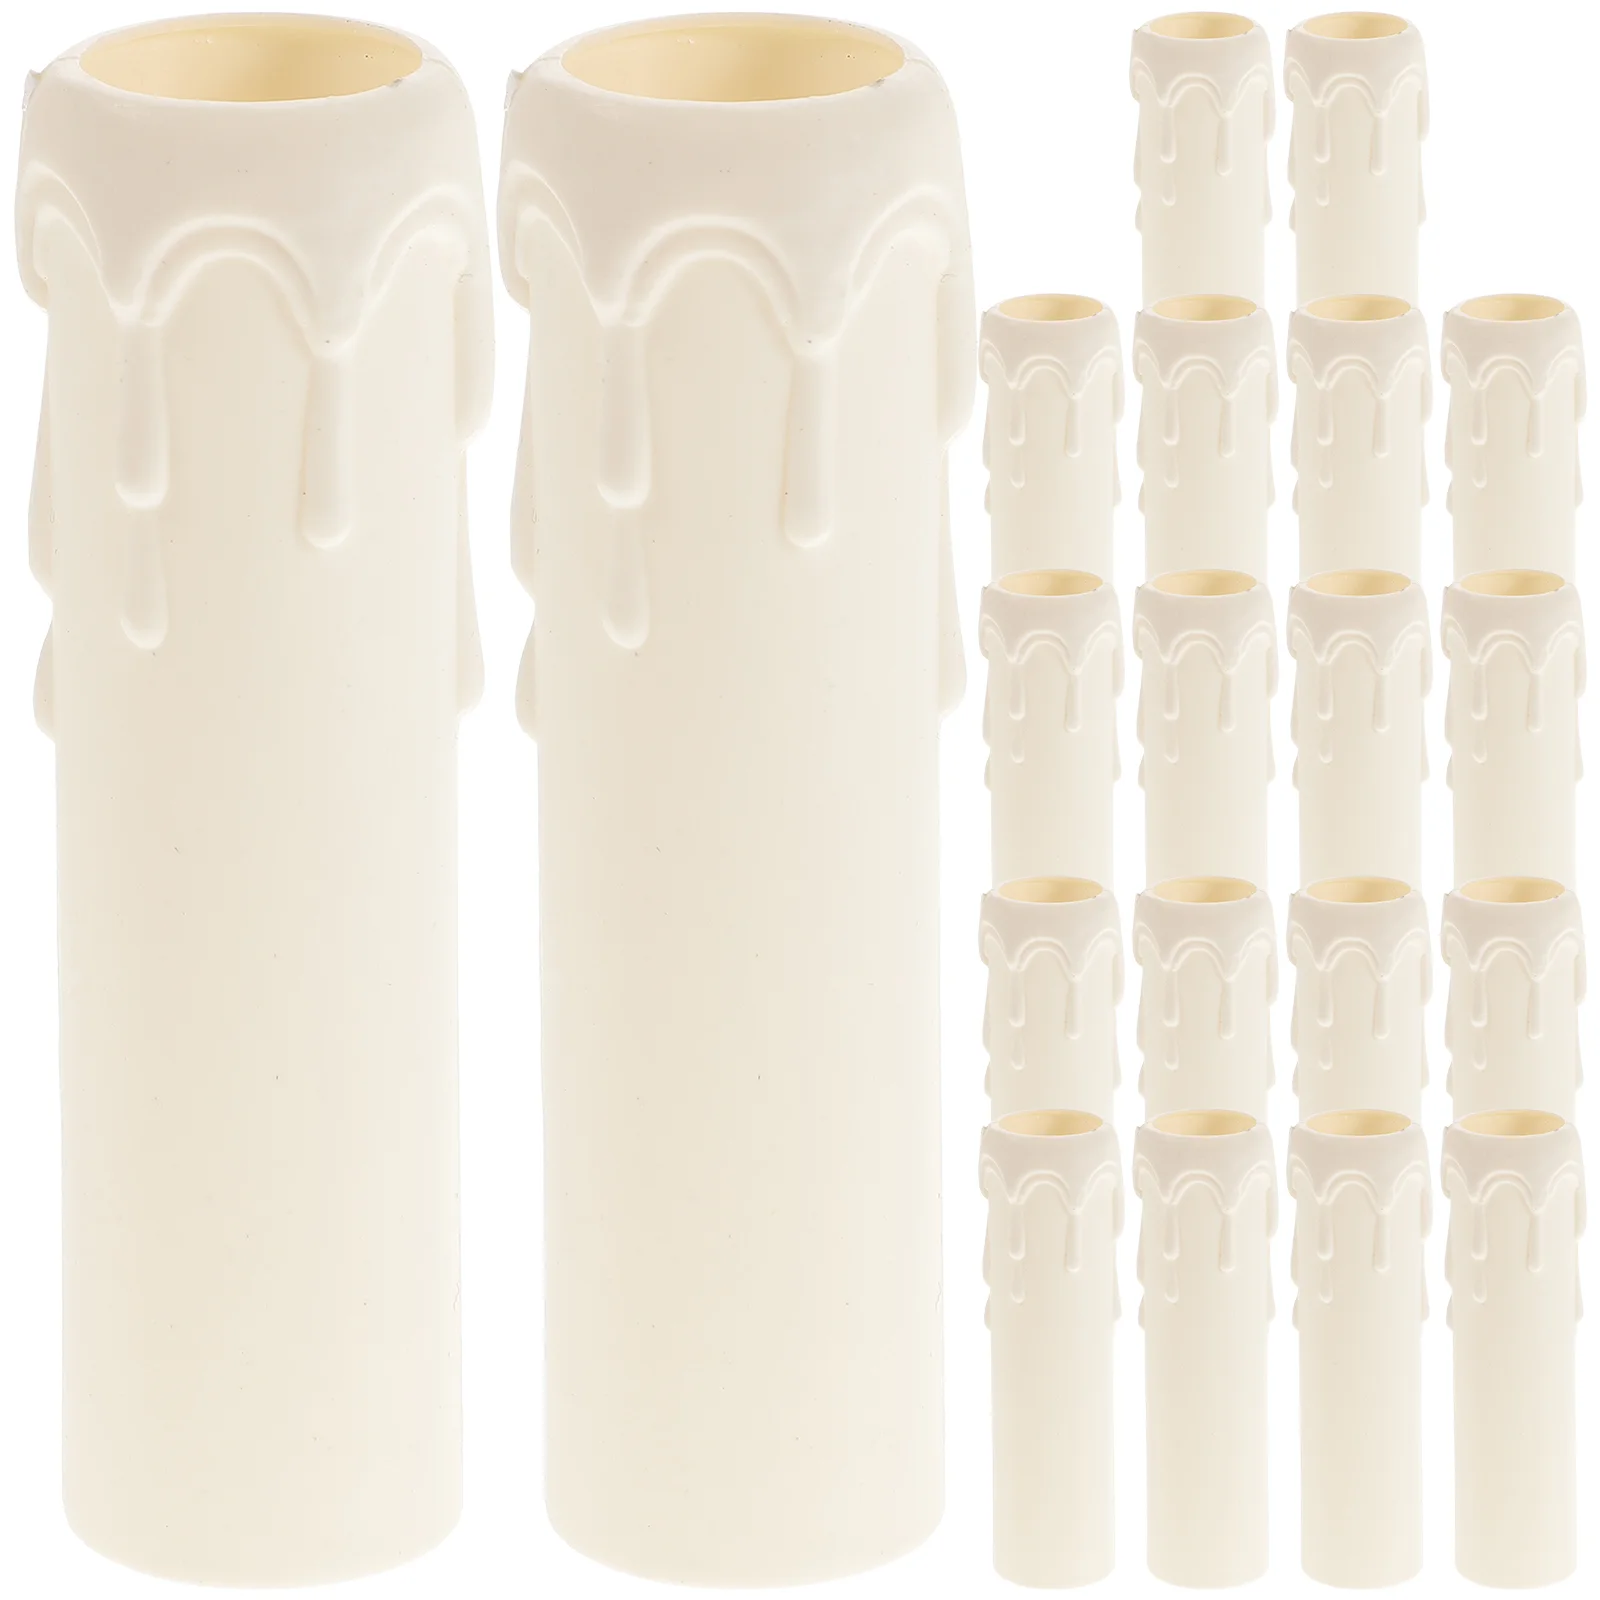 20 Pcs Tears Sleeves Socket Tubes Chandelier Covers Durable Casings Ceiling Decor Plastic Holders Tubular Creative marine waterproof wiring hole kayak accessories cable organizer reusable sleeves kayak electrical boot silicone plastic rv yacht